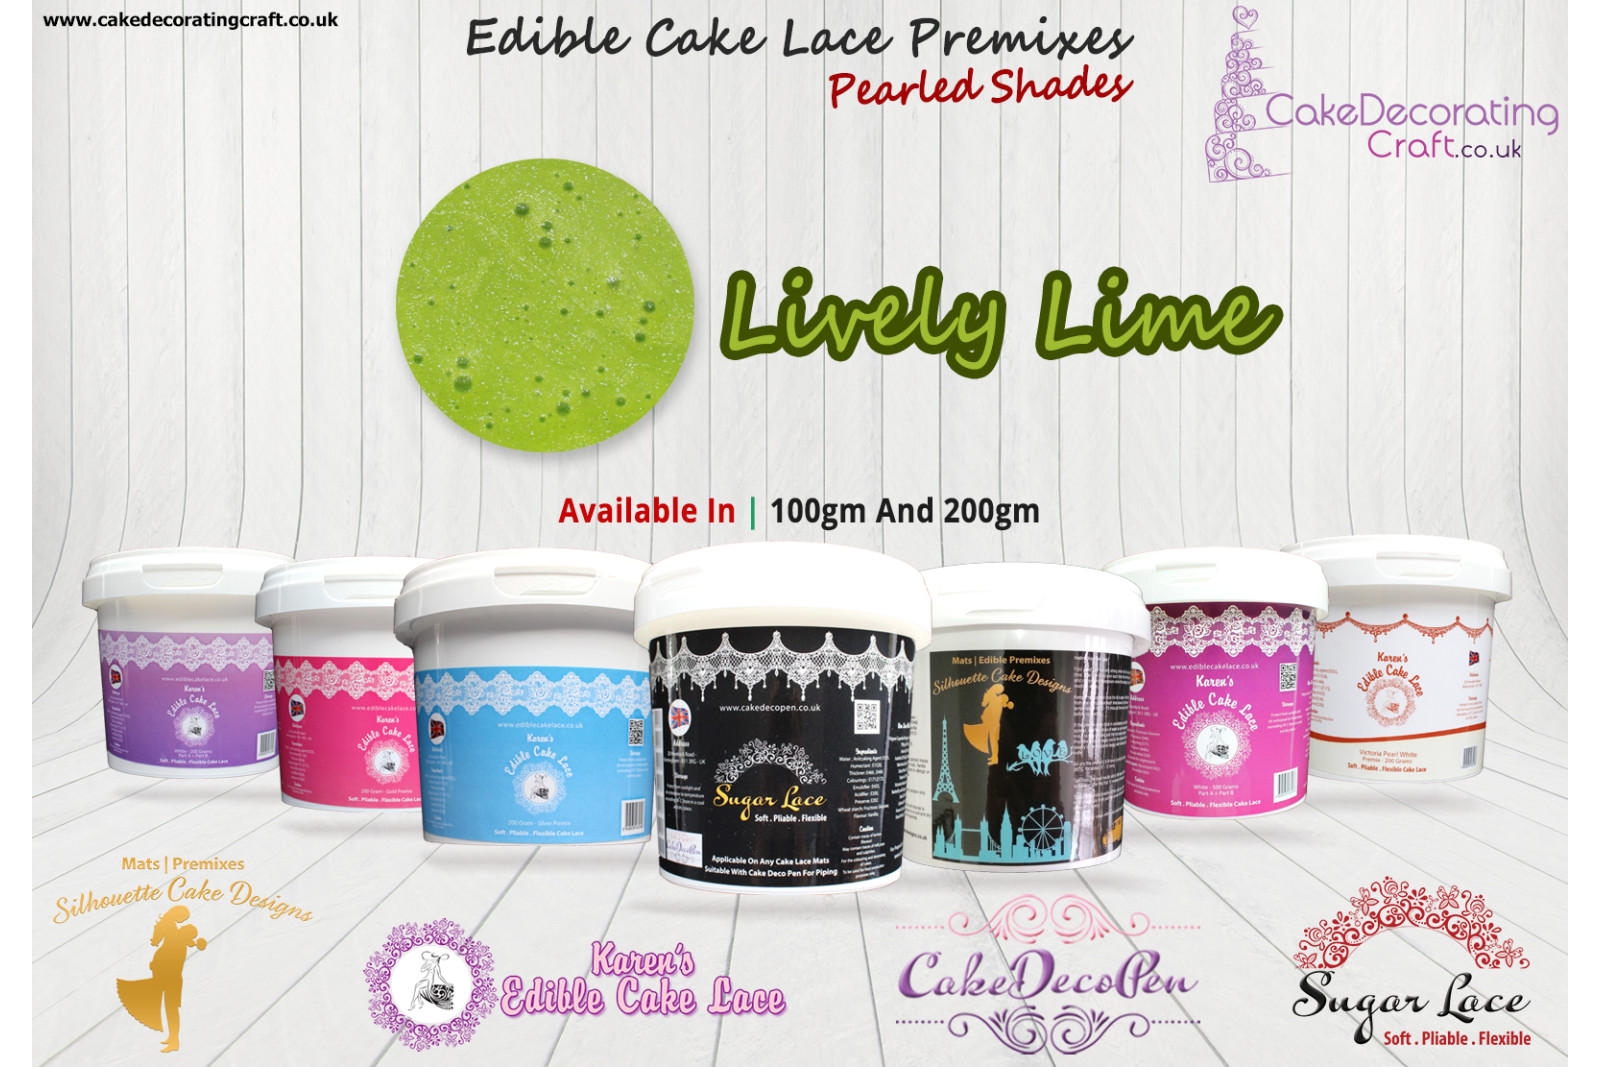 Lively Lime | Edible Cake Lace Premixes | Pearled Shade | 200 Grams